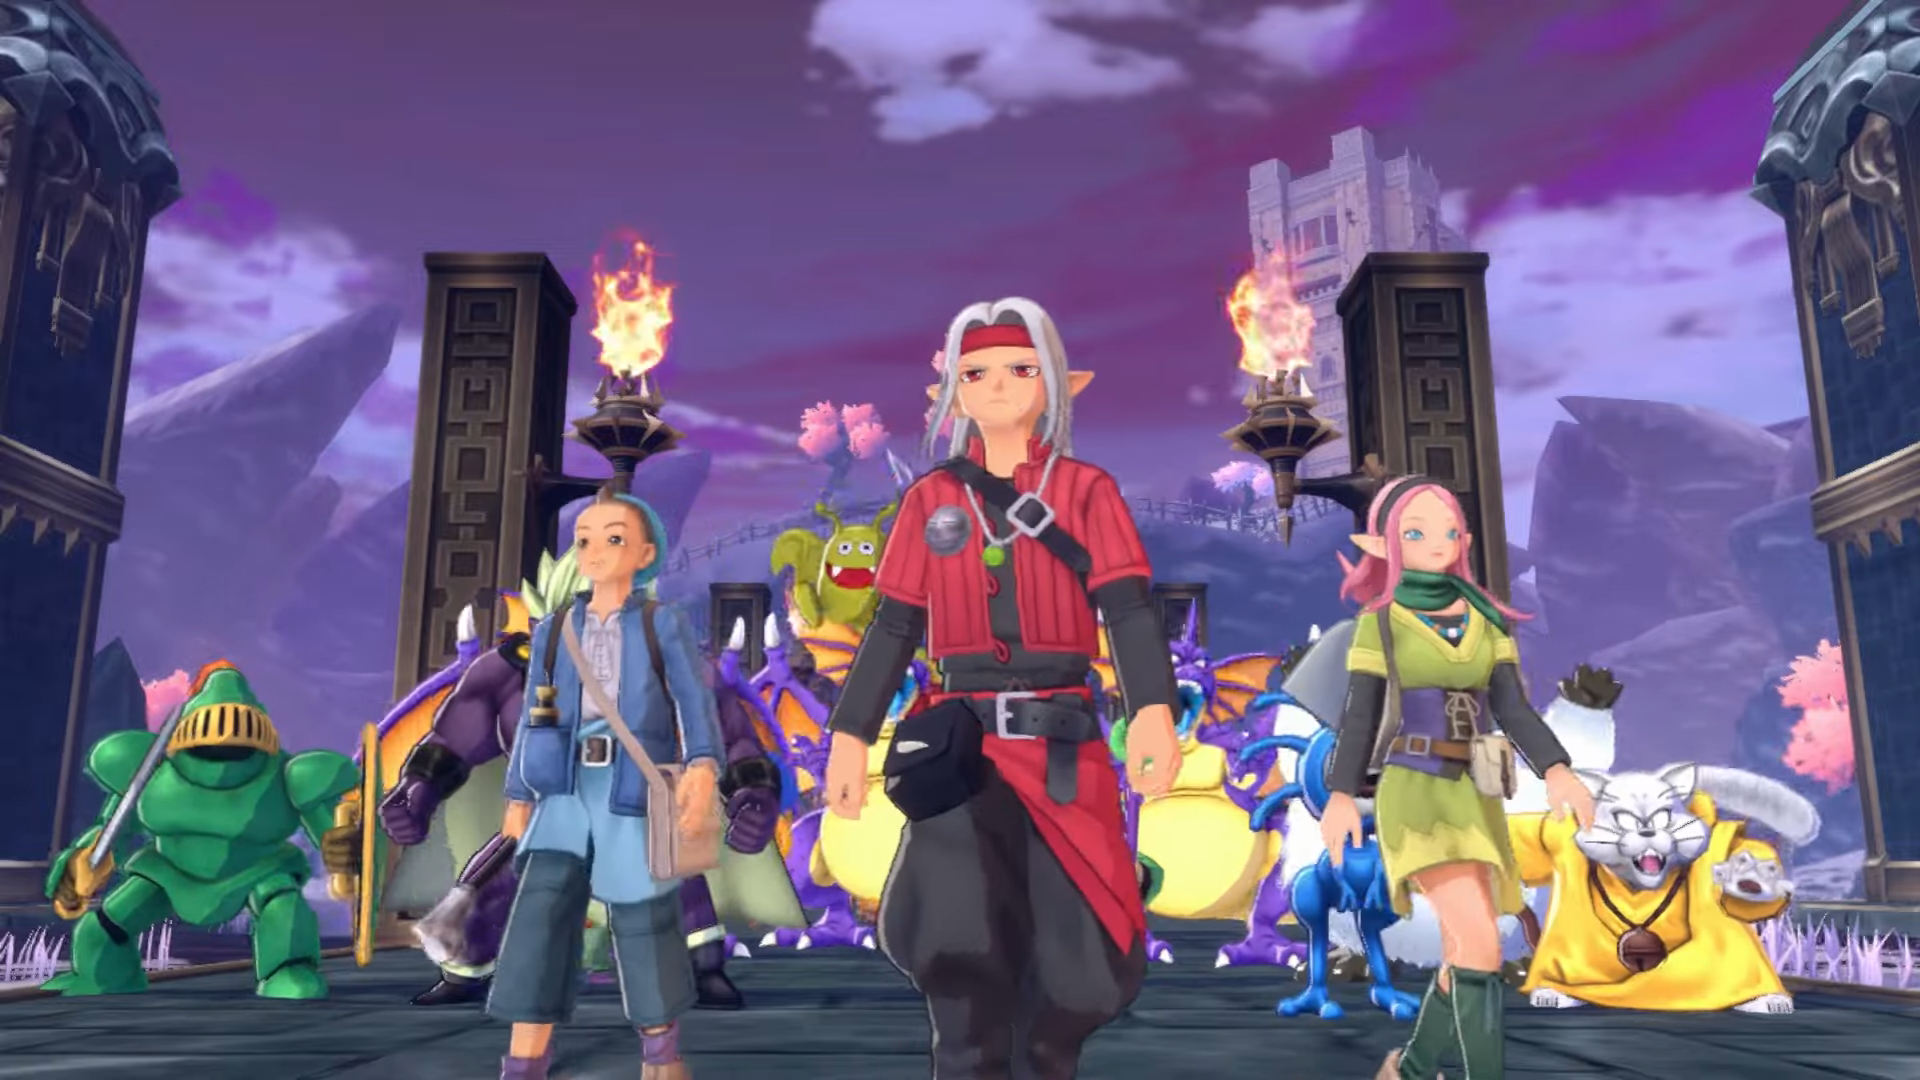 Dragon Quest Monsters: The Dark Prince Shares Launch Trailer